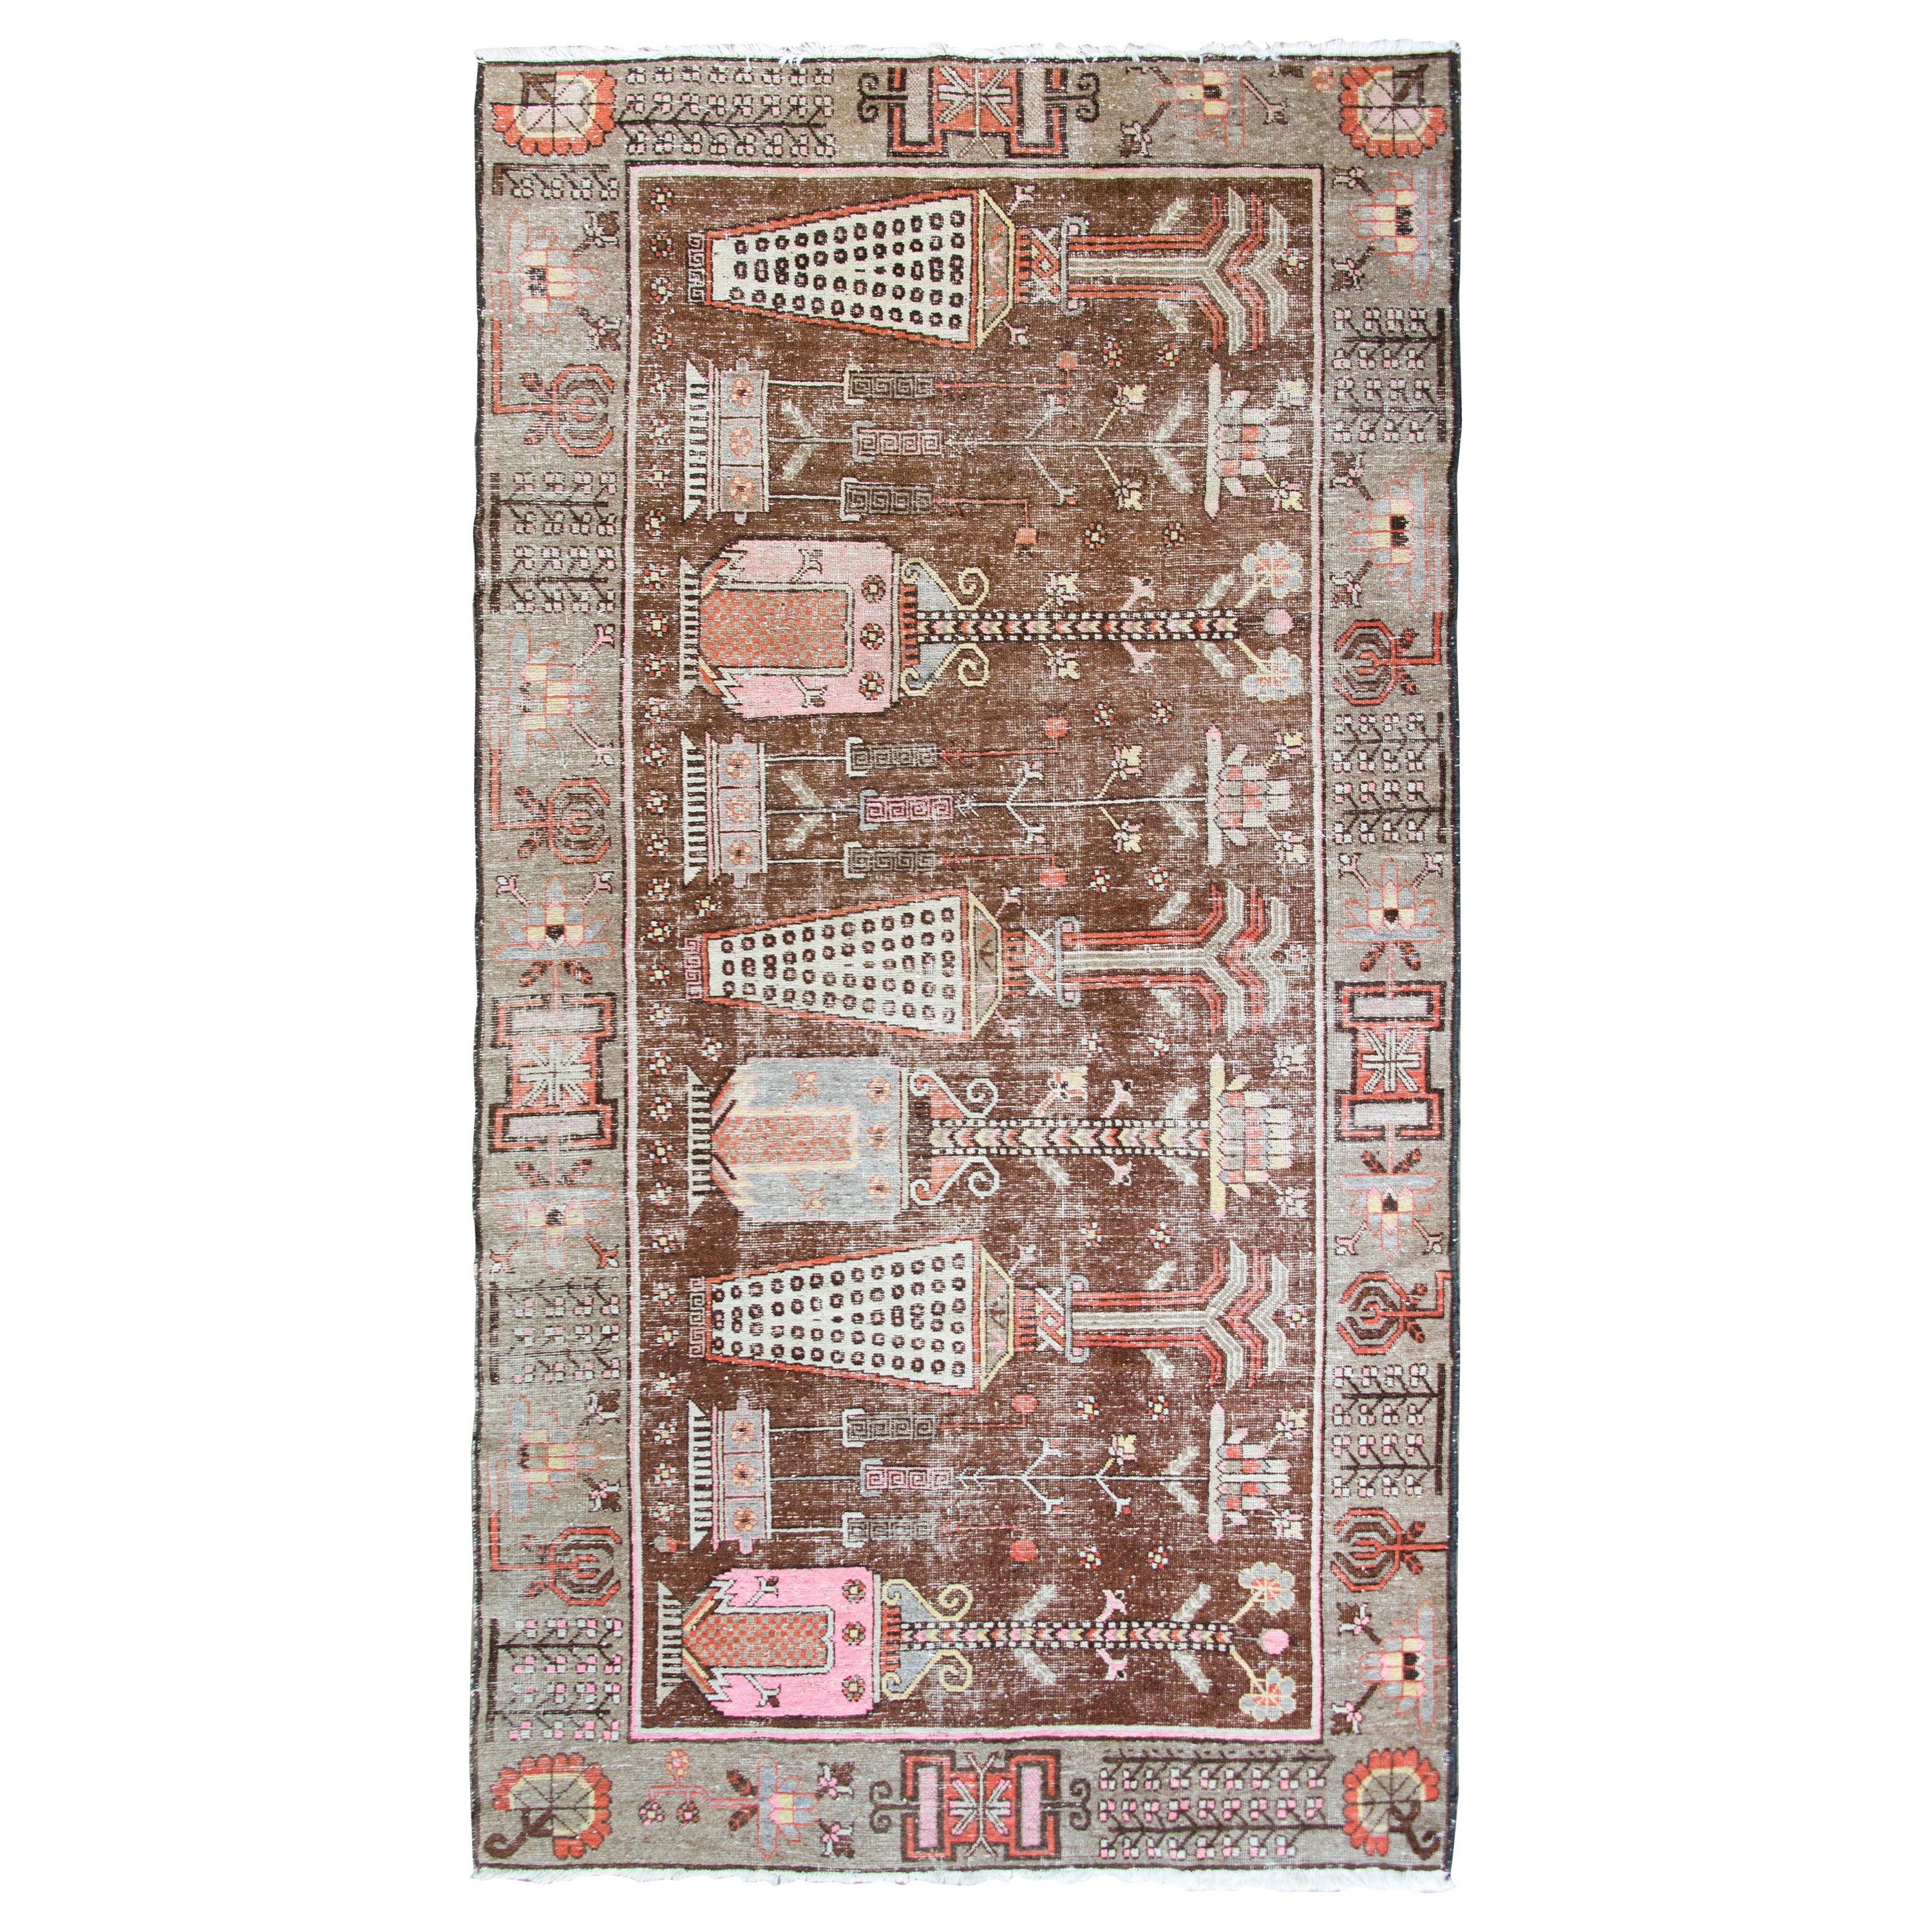 Early 20th Century Khotan Rug For Sale